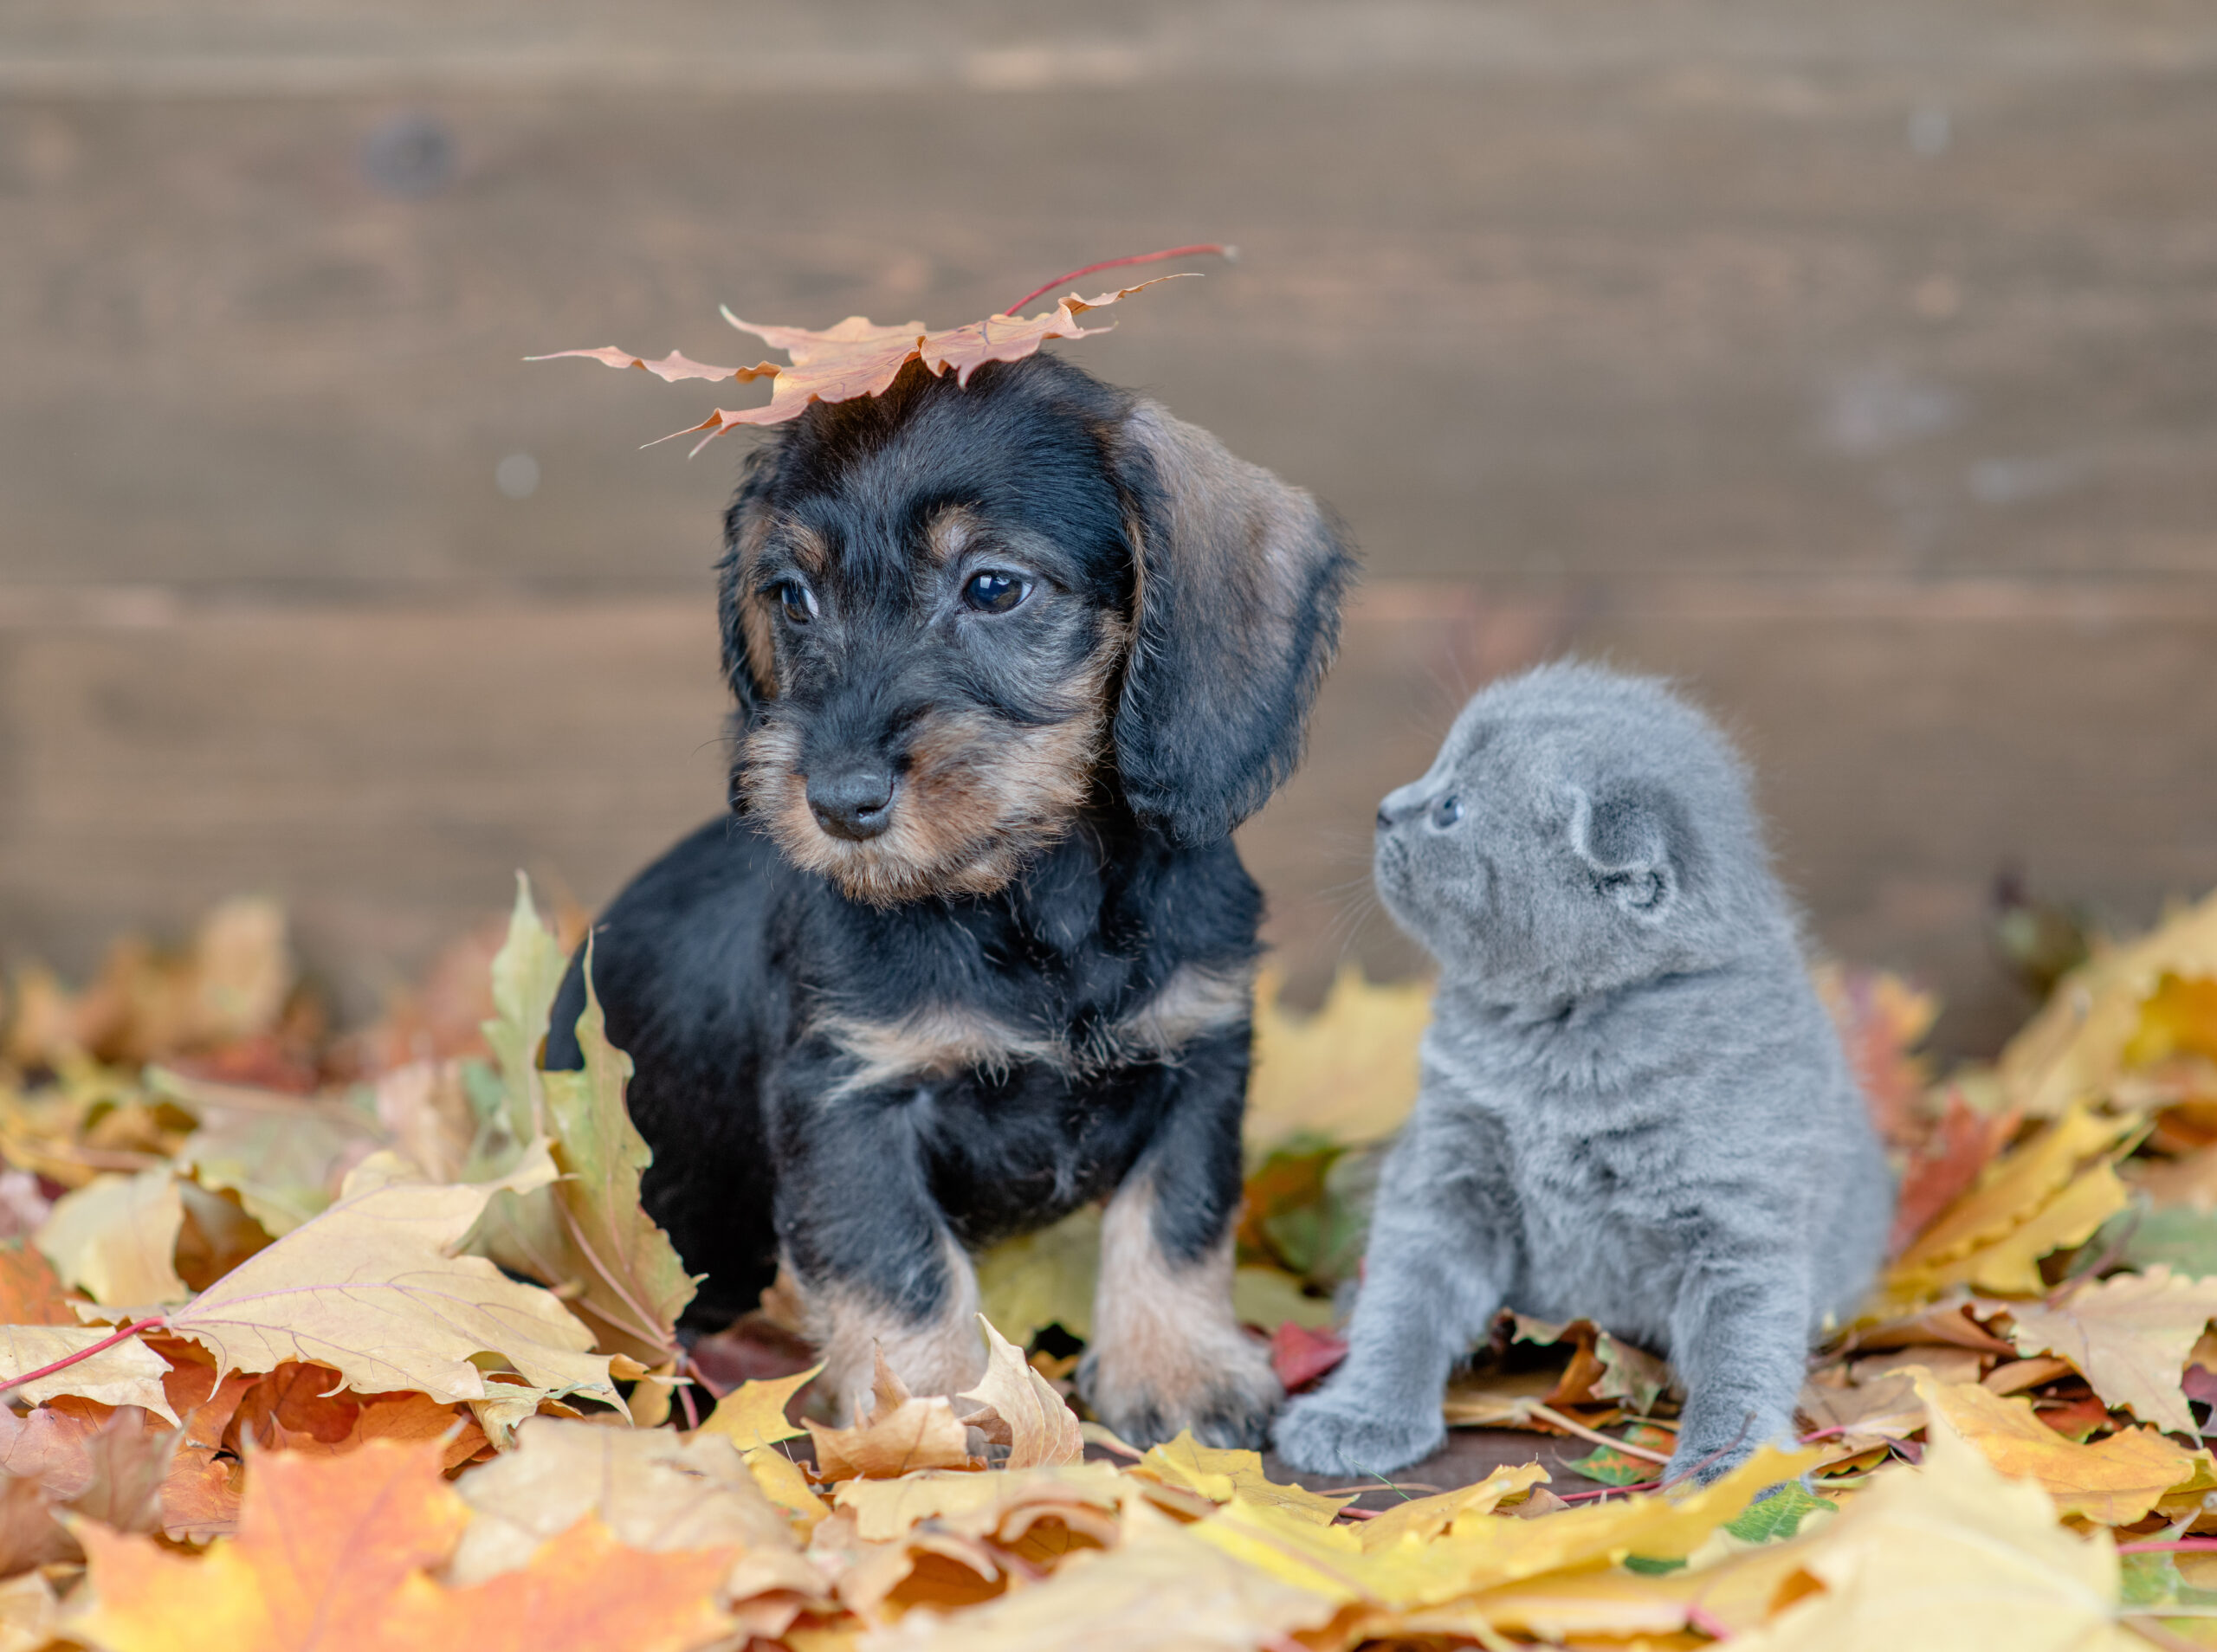 Puppy and kitten sitting together  on autumn foliage